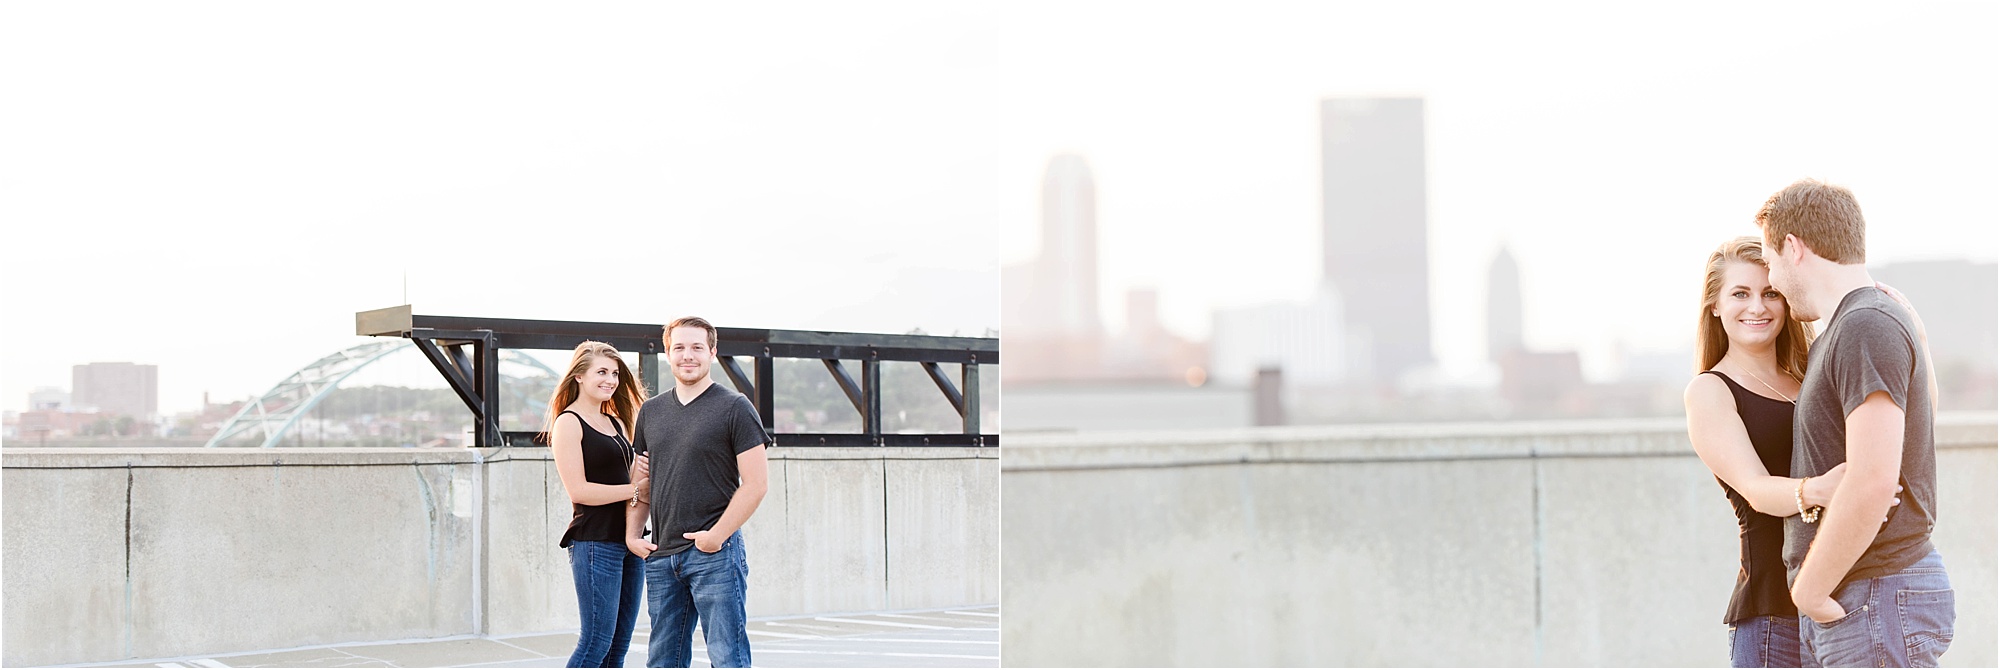 oakland-southside-pittsburgh-engagement-photos-57